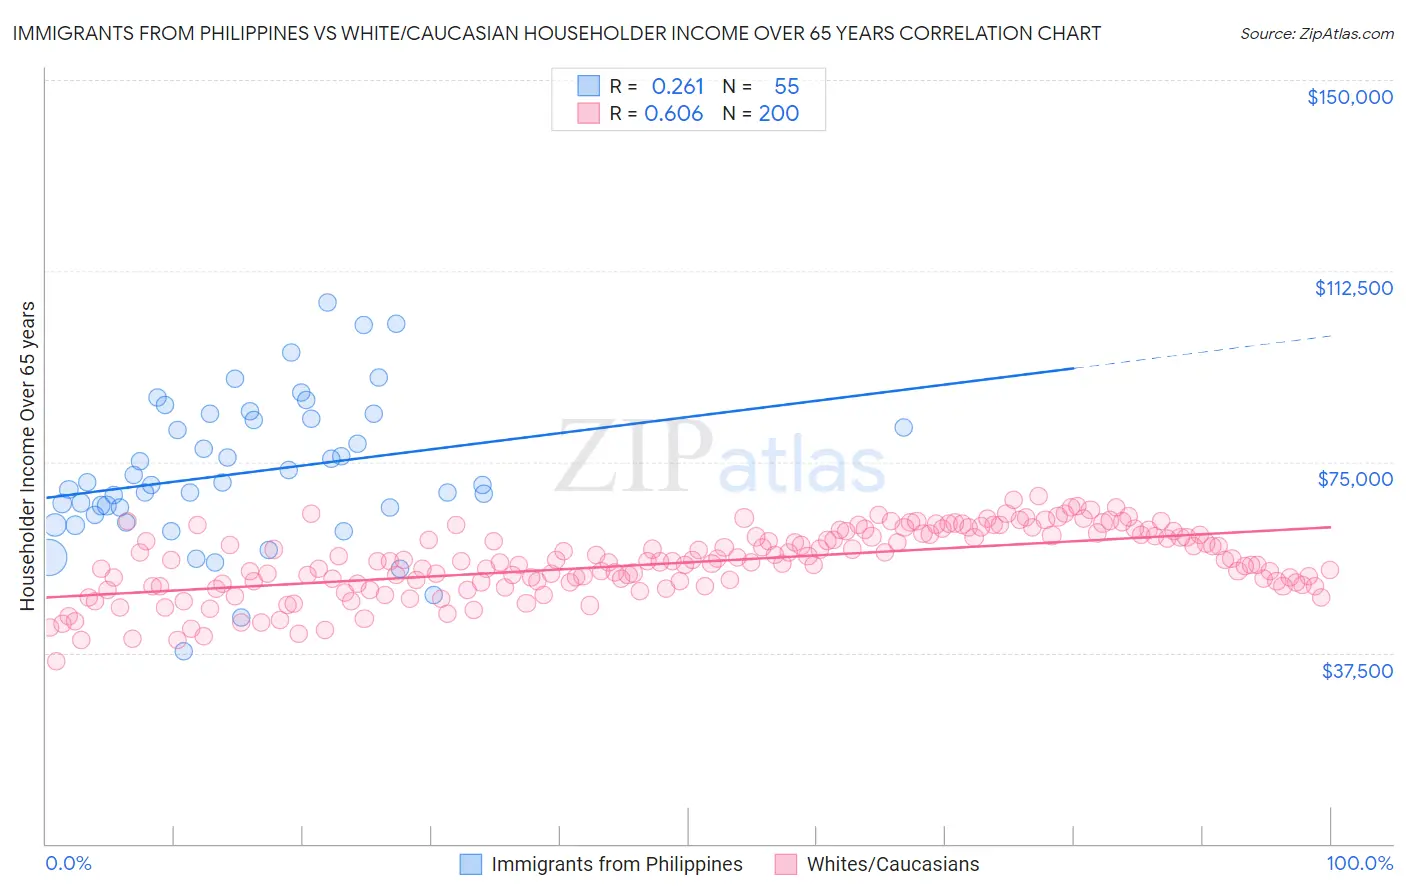 Immigrants from Philippines vs White/Caucasian Householder Income Over 65 years